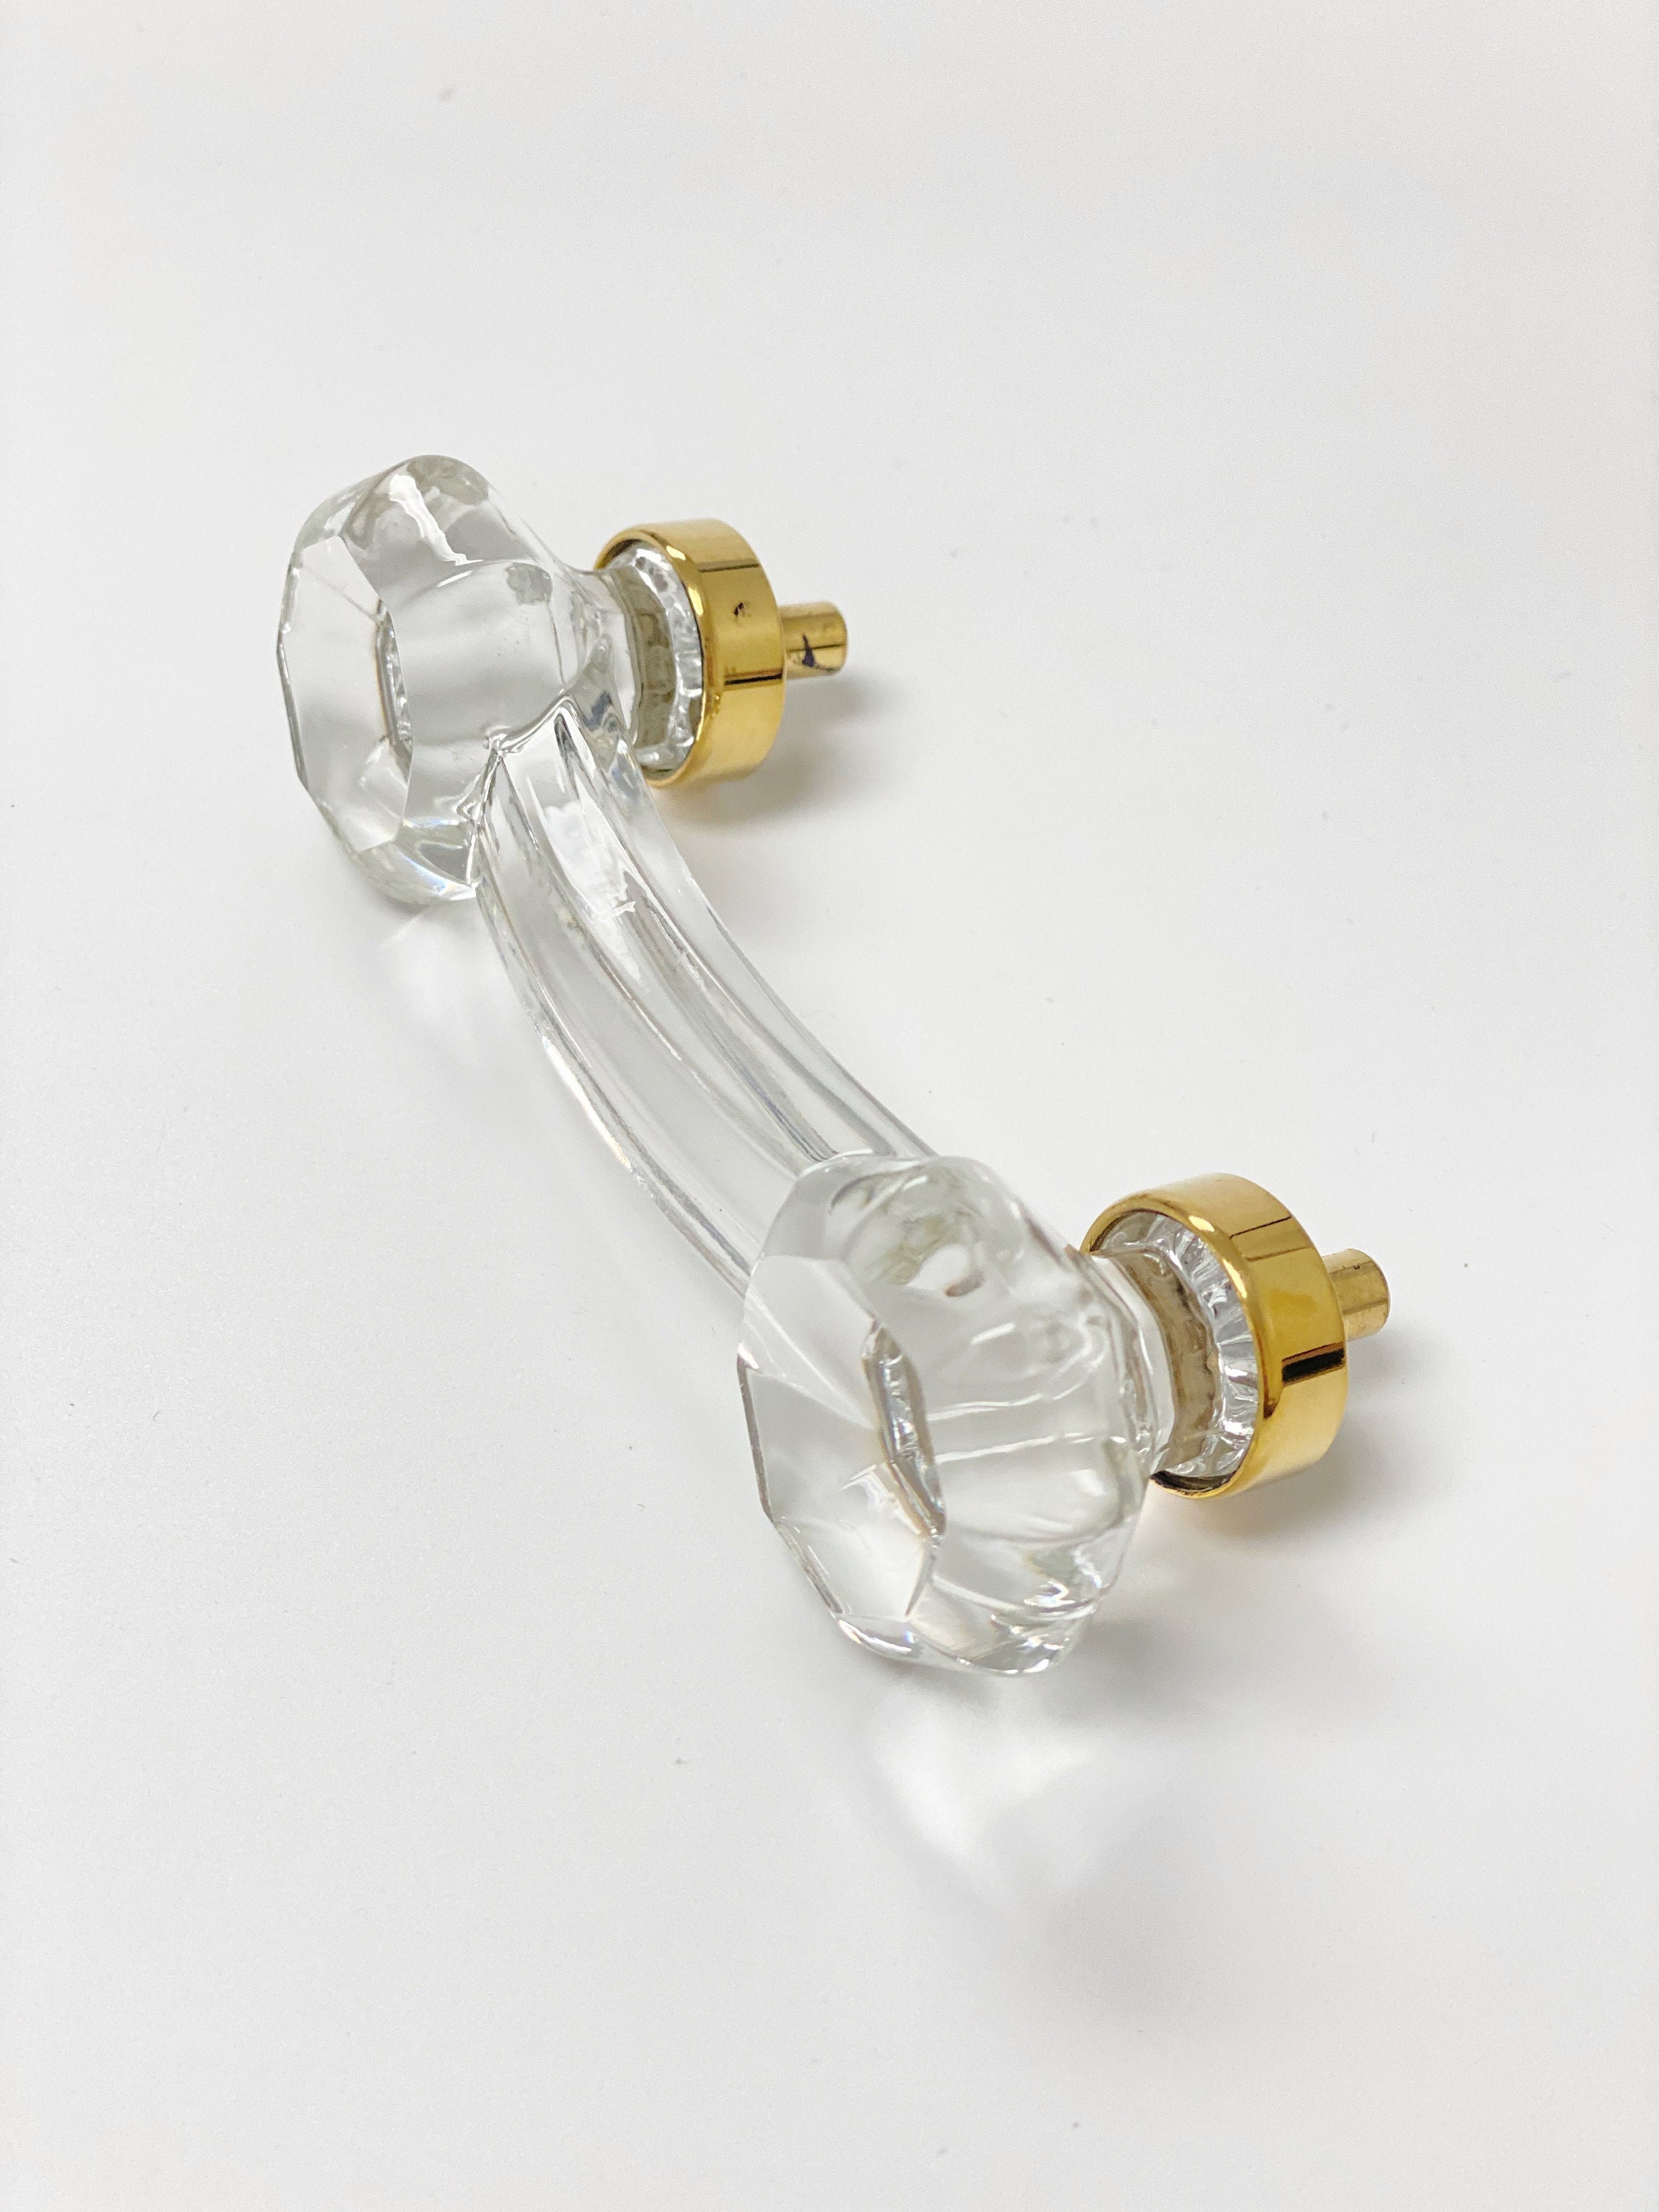 Unlacquered Polished Brass and Clear Glass Cabinet Knob and Drawer Pull  Glass Cabinet Hardware, Drawer Furniture Handle 